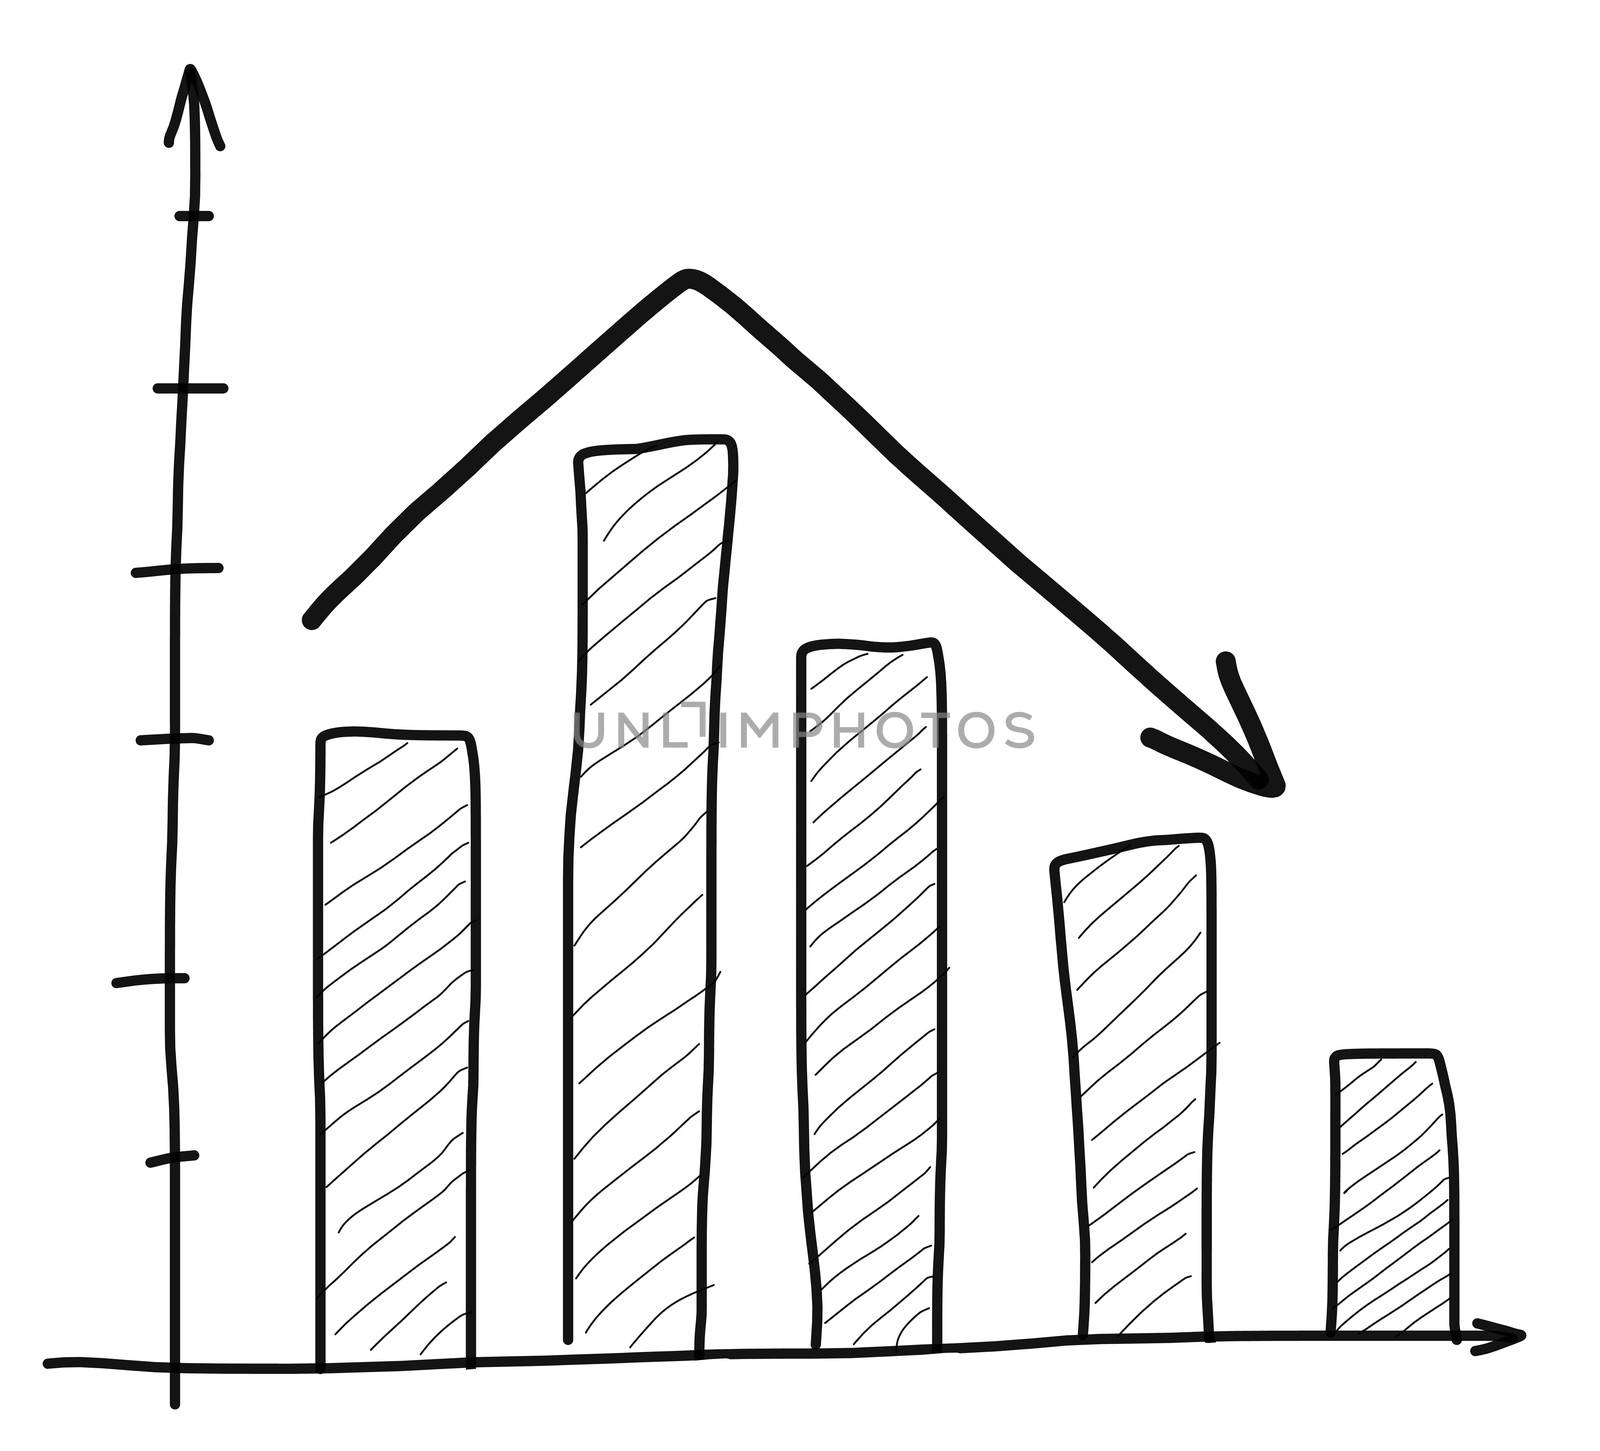 Drawing of graph up and down on white paper